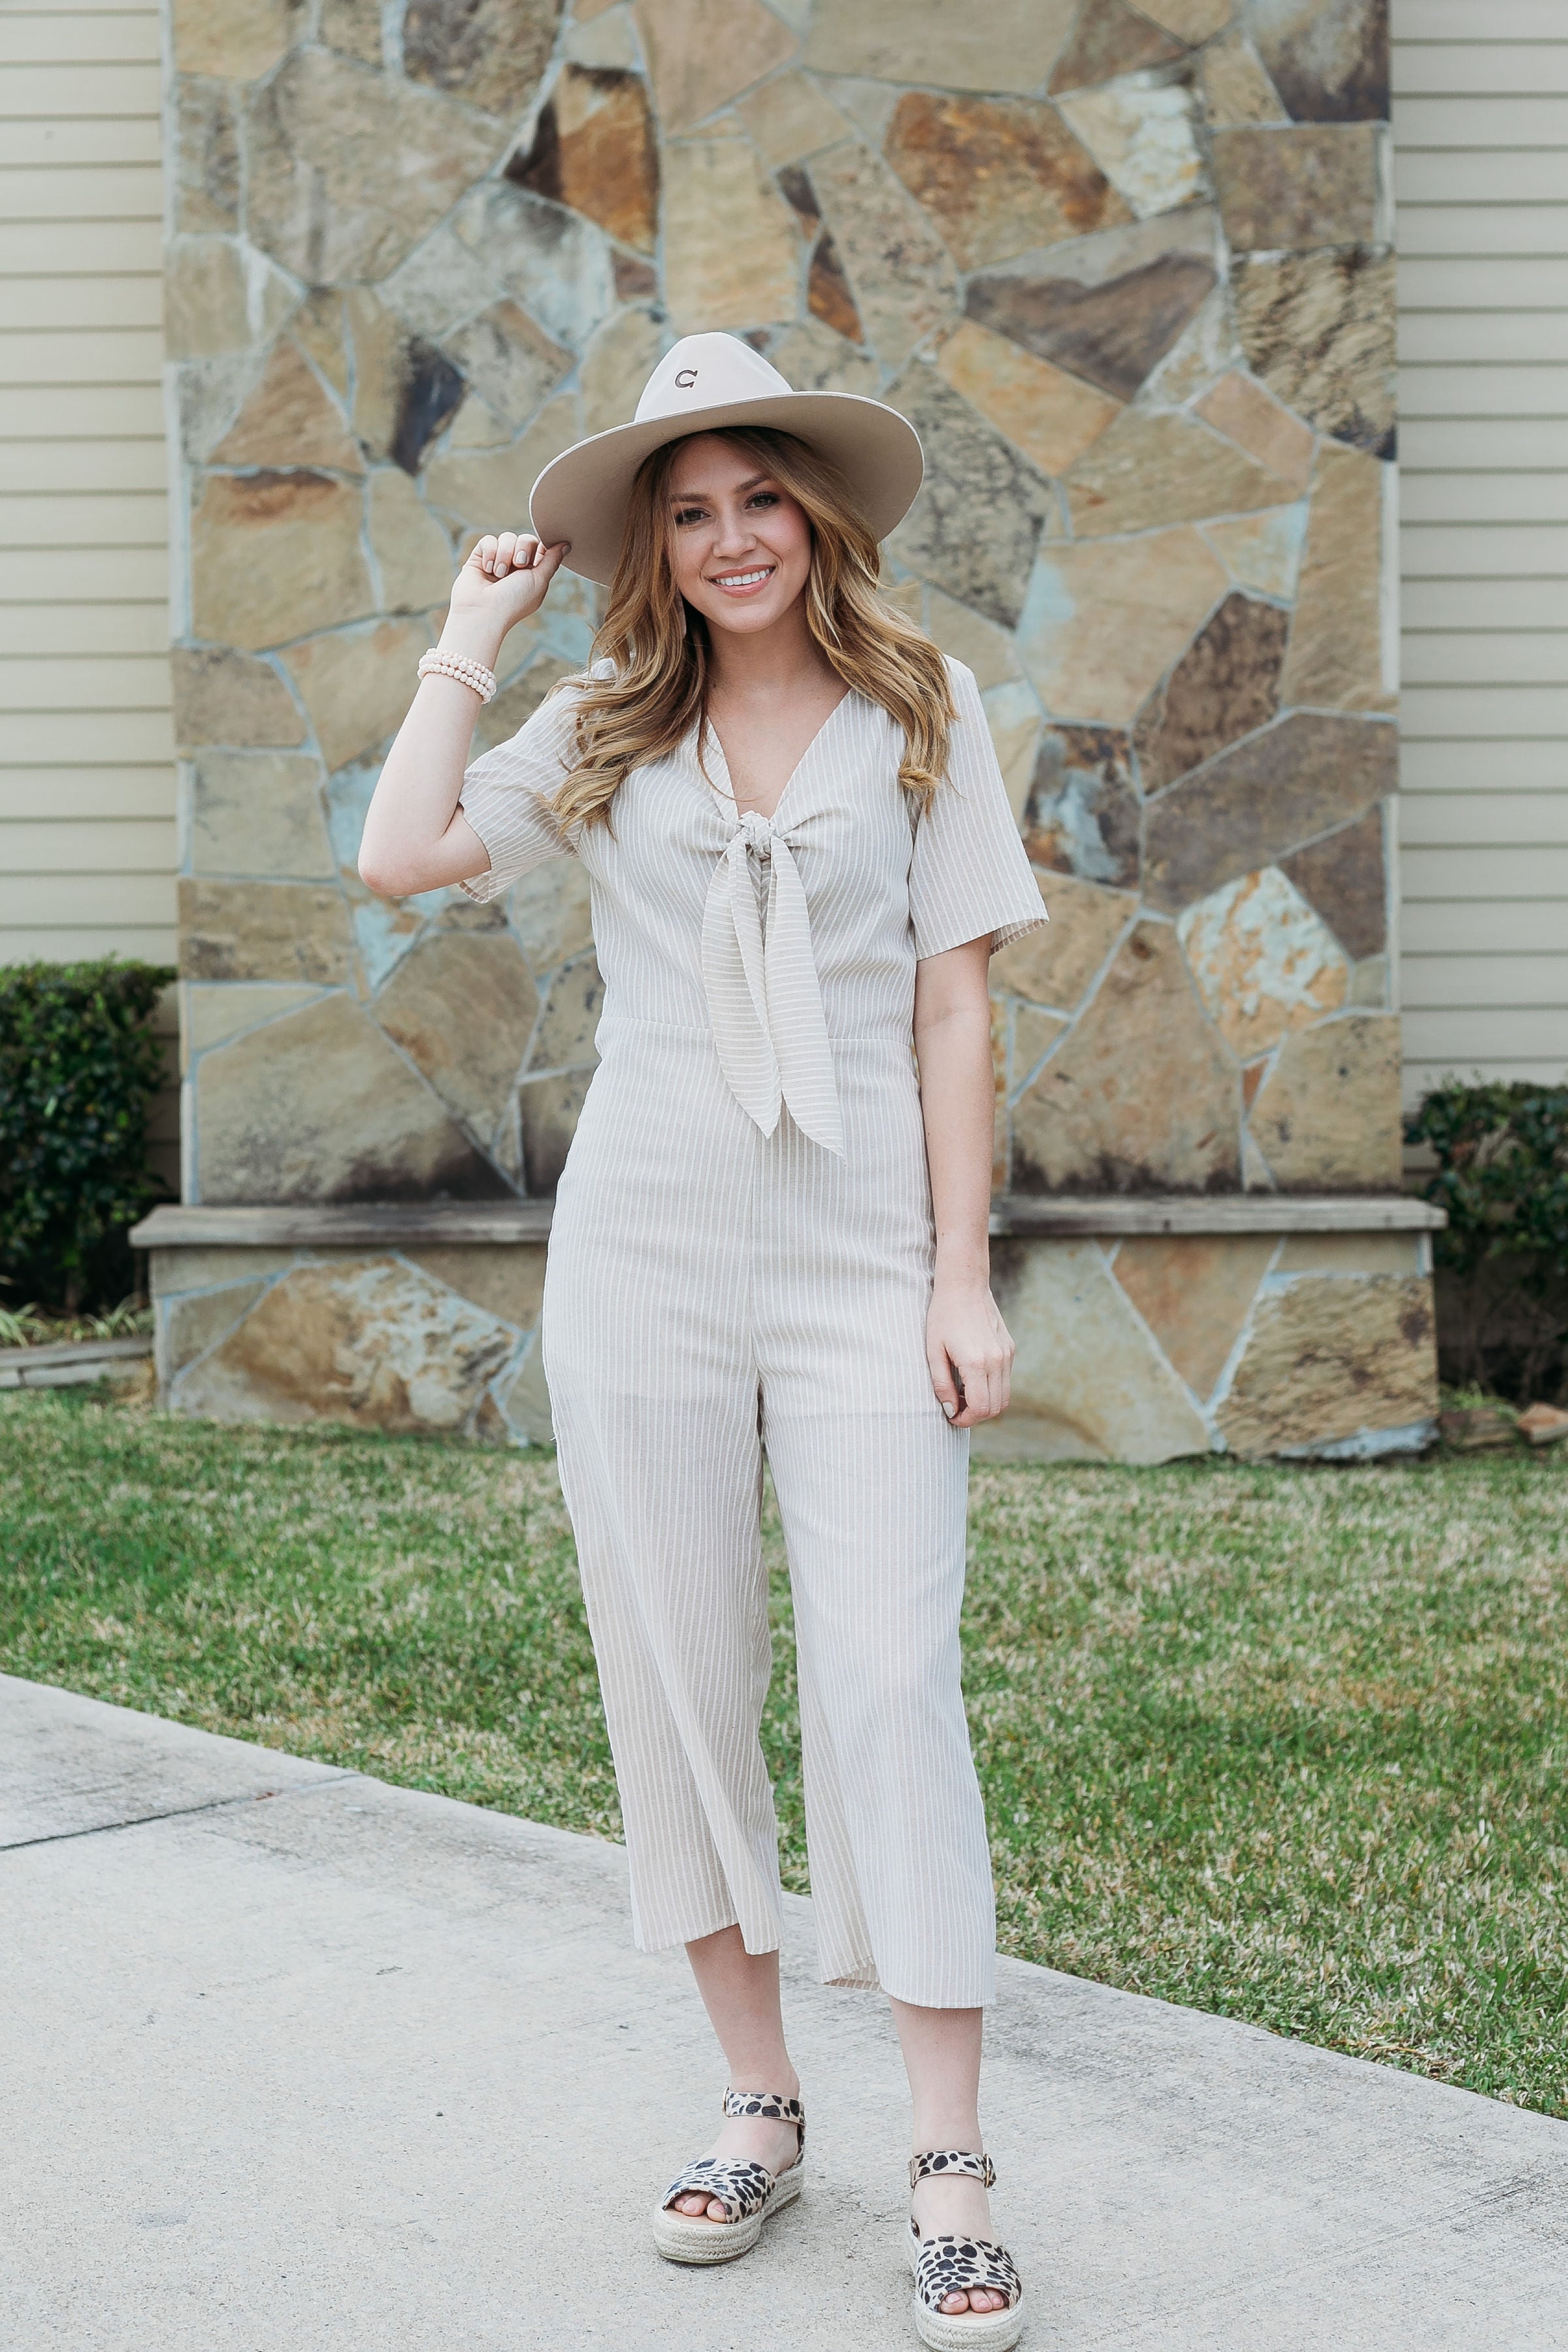 hint at perfection Women's trendy missy boutique clothing affordable clothing jumper jumpsuit romper stripe taupe khaki bohemian 